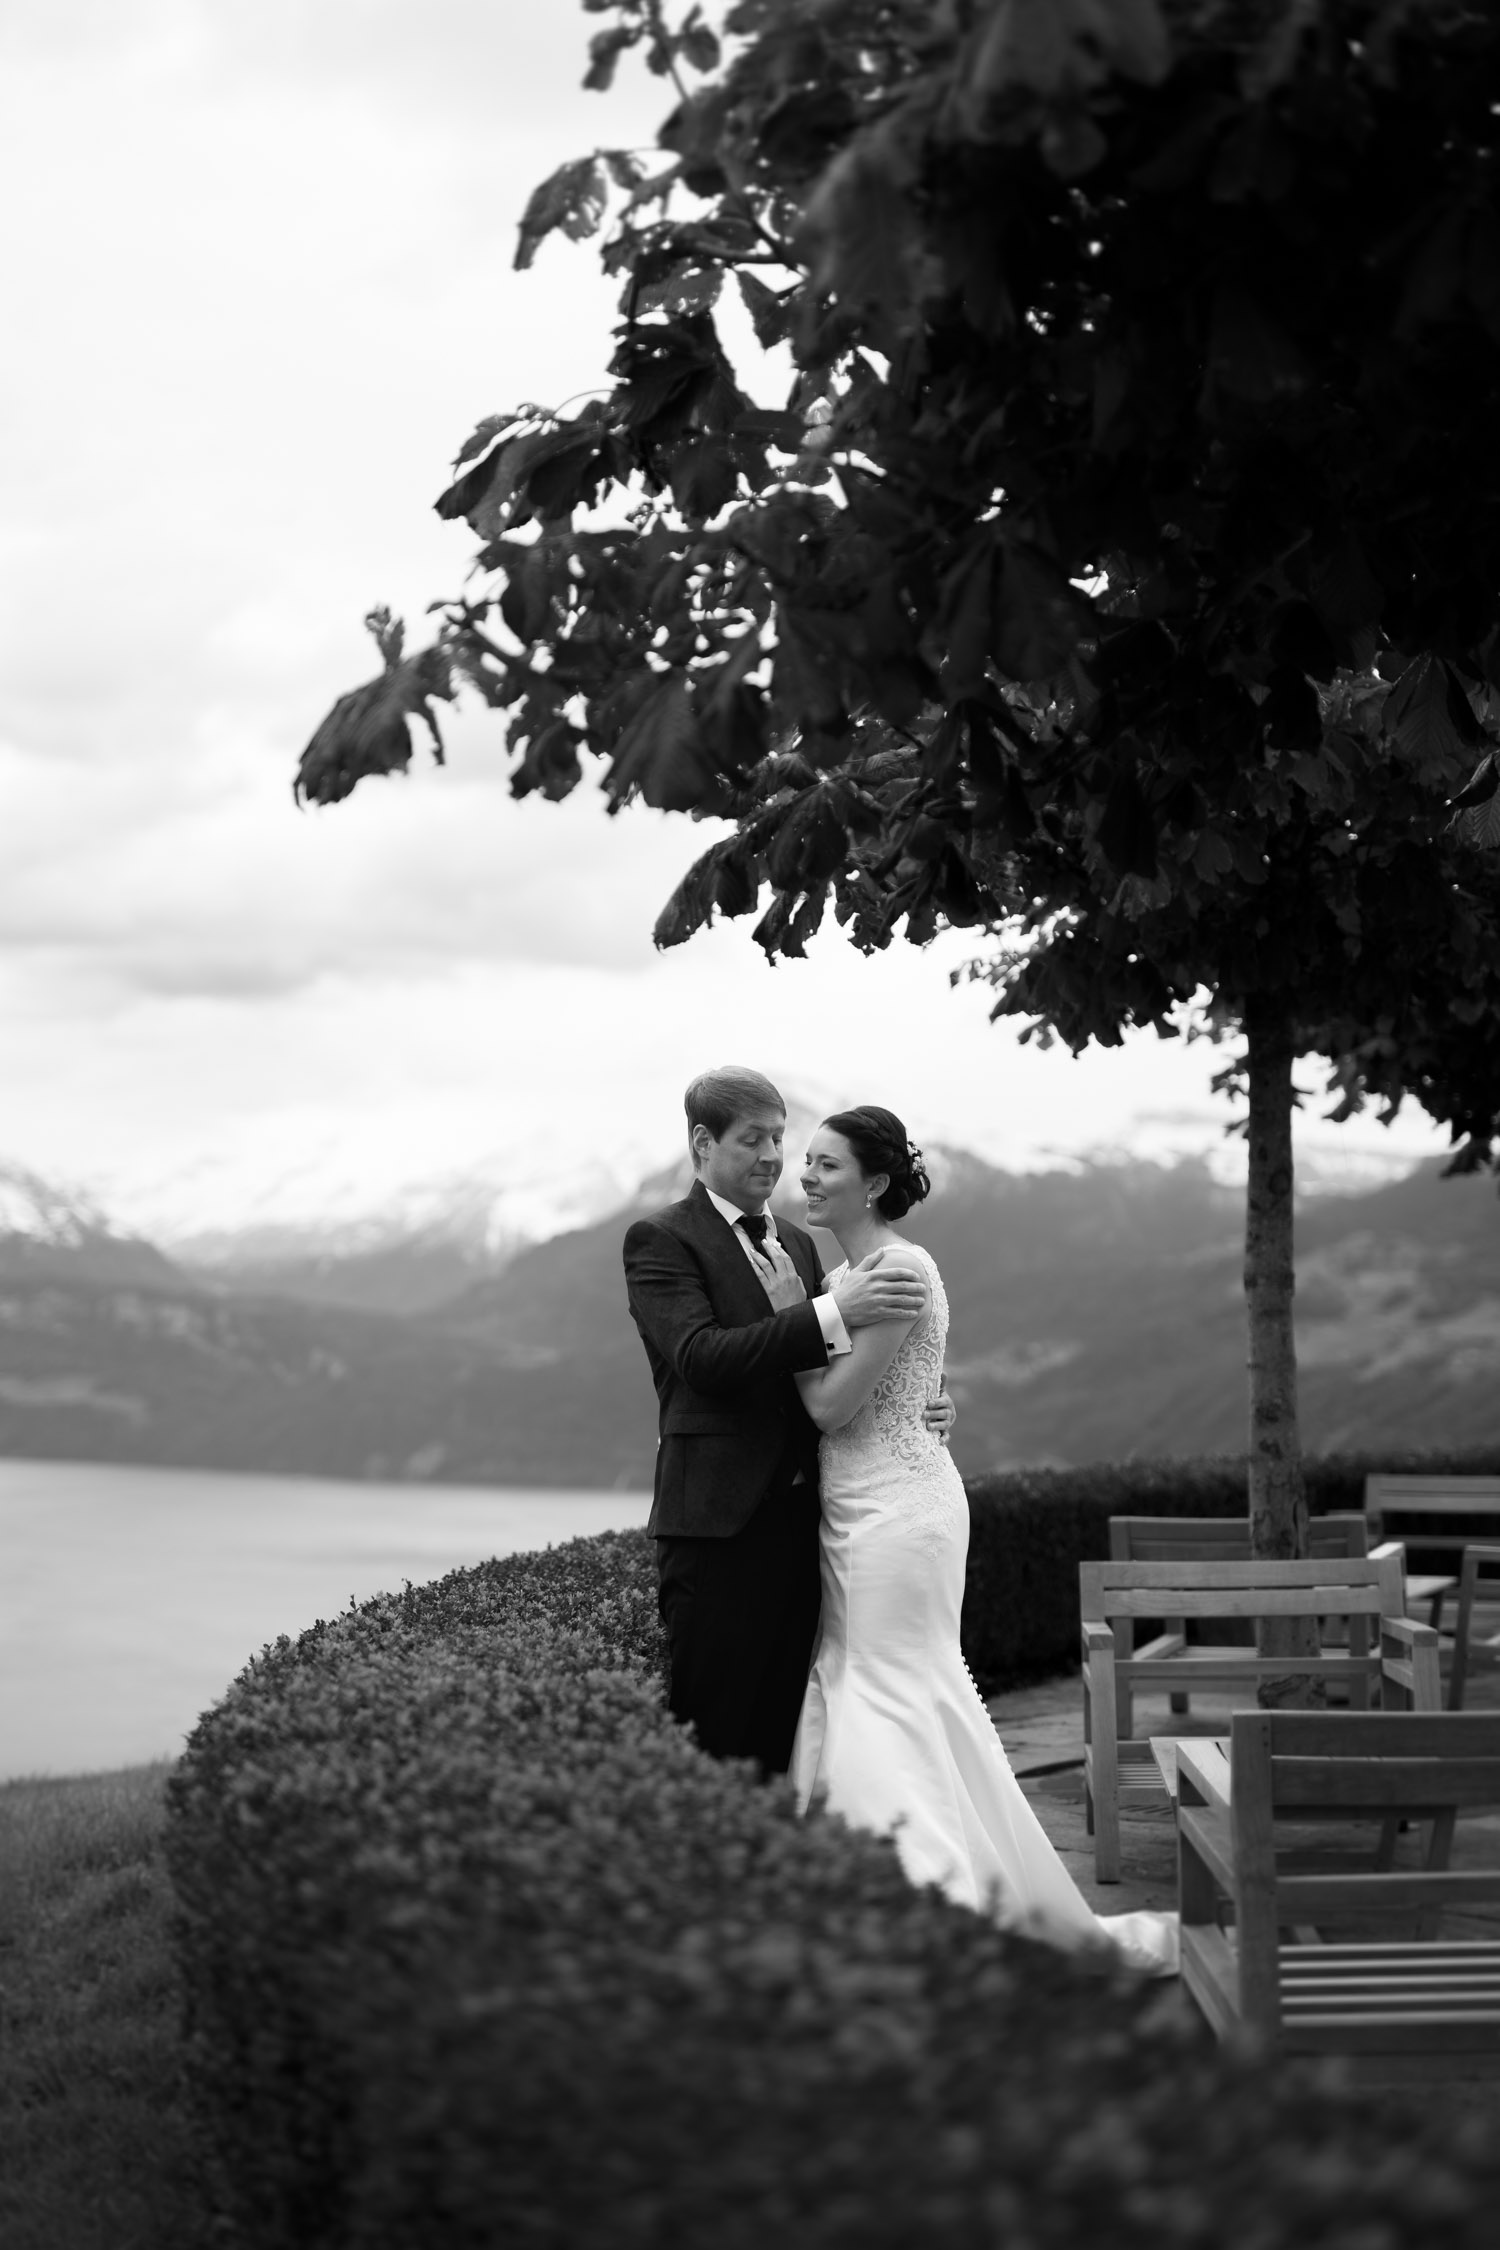 Photoshoot of bridal couple at Villa Honegg for a wedding in the Ennetbürgen chapel, beautiful views at mountains and Lake Lucerne